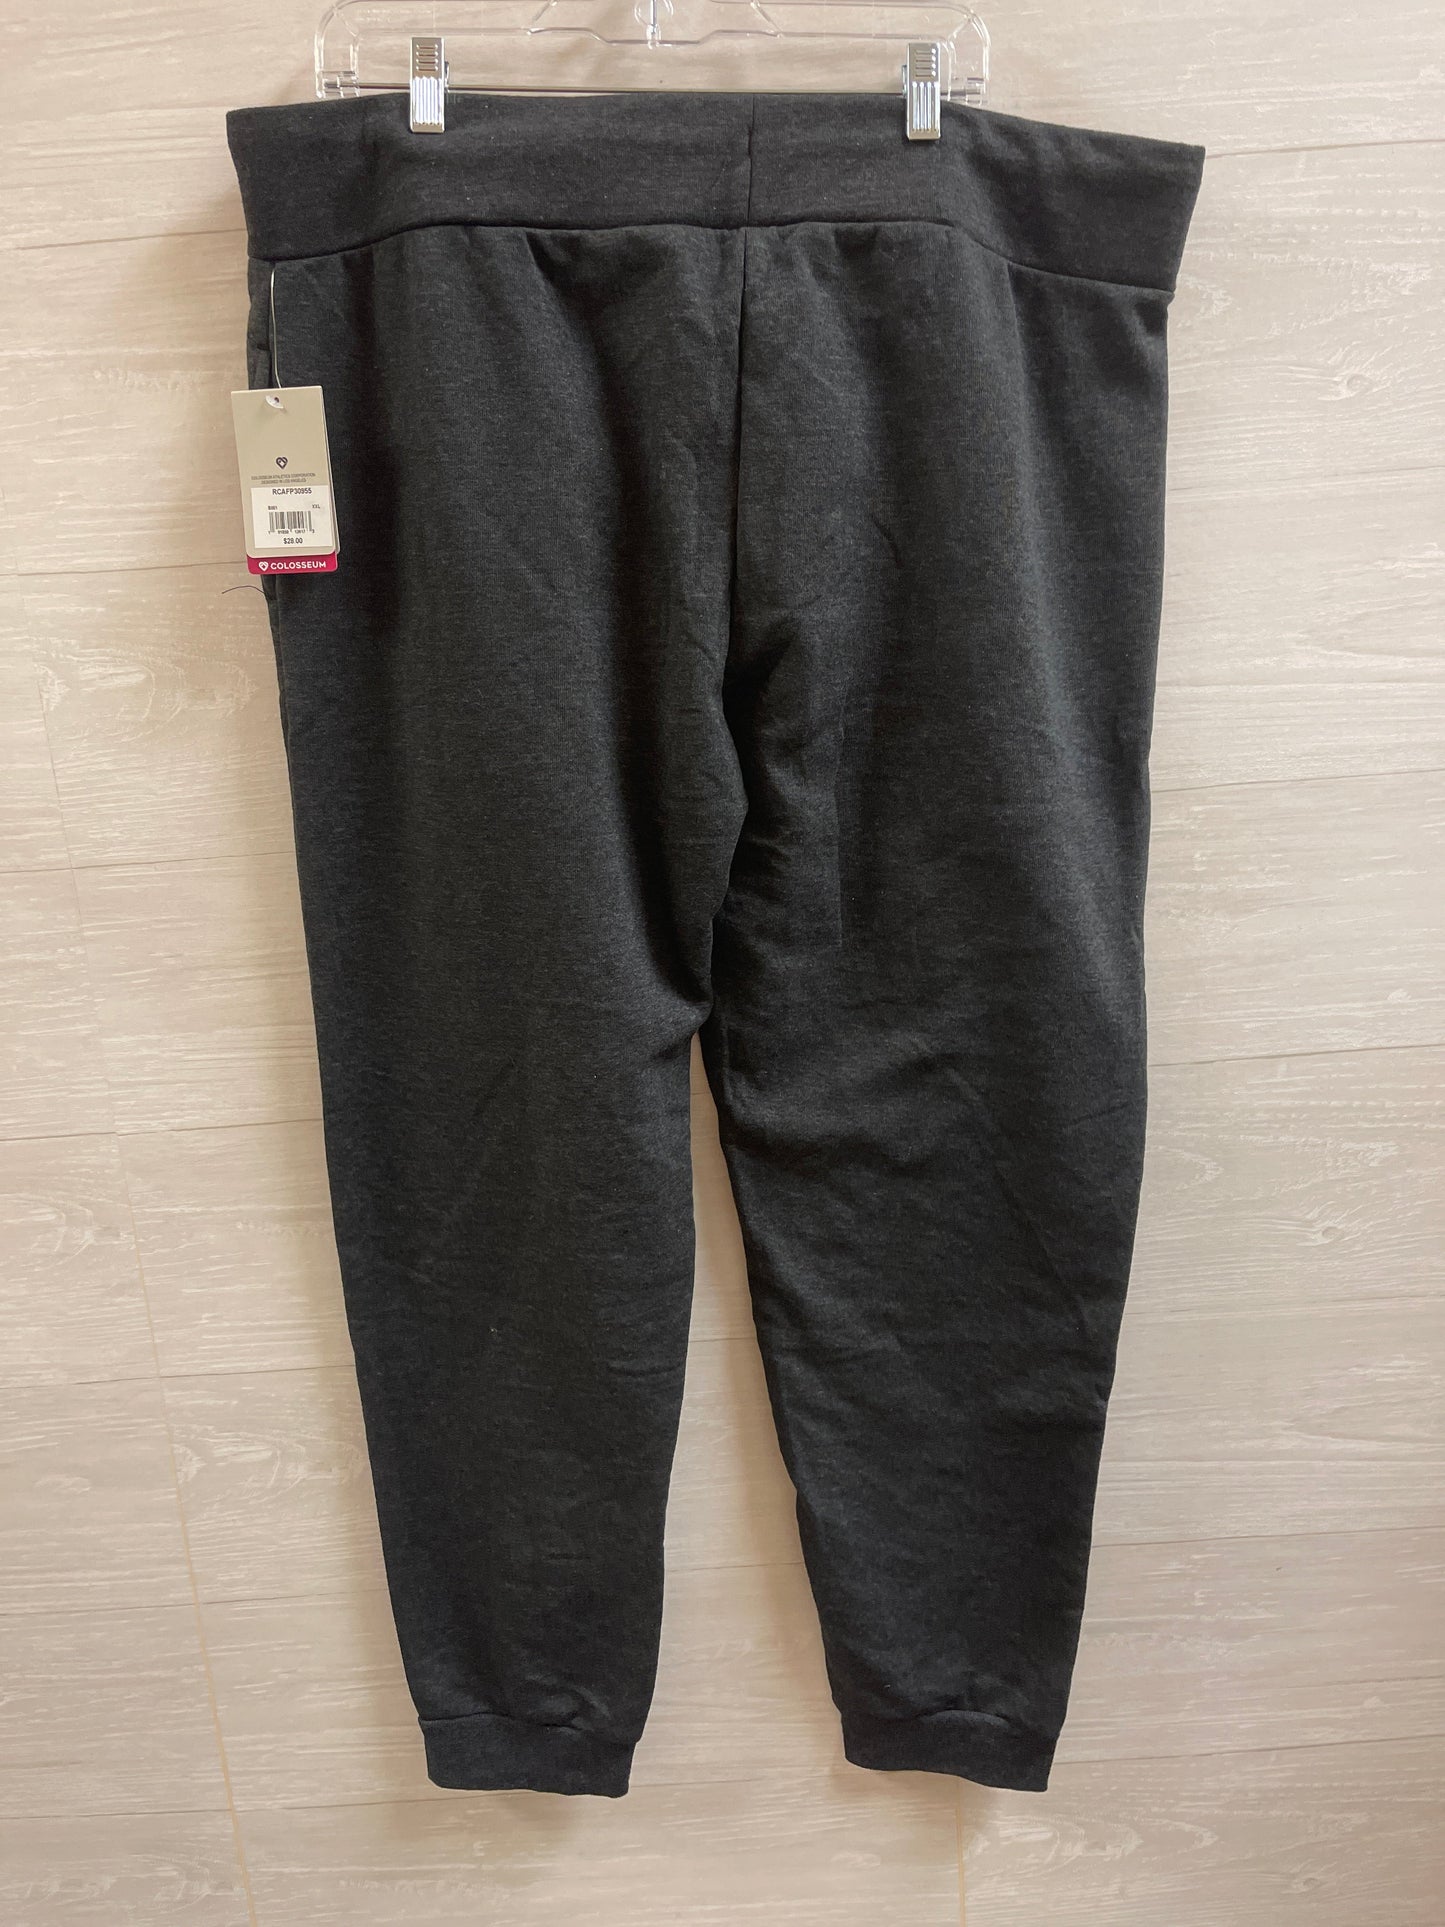 Athletic Pants By Colosseum  Size: 2x